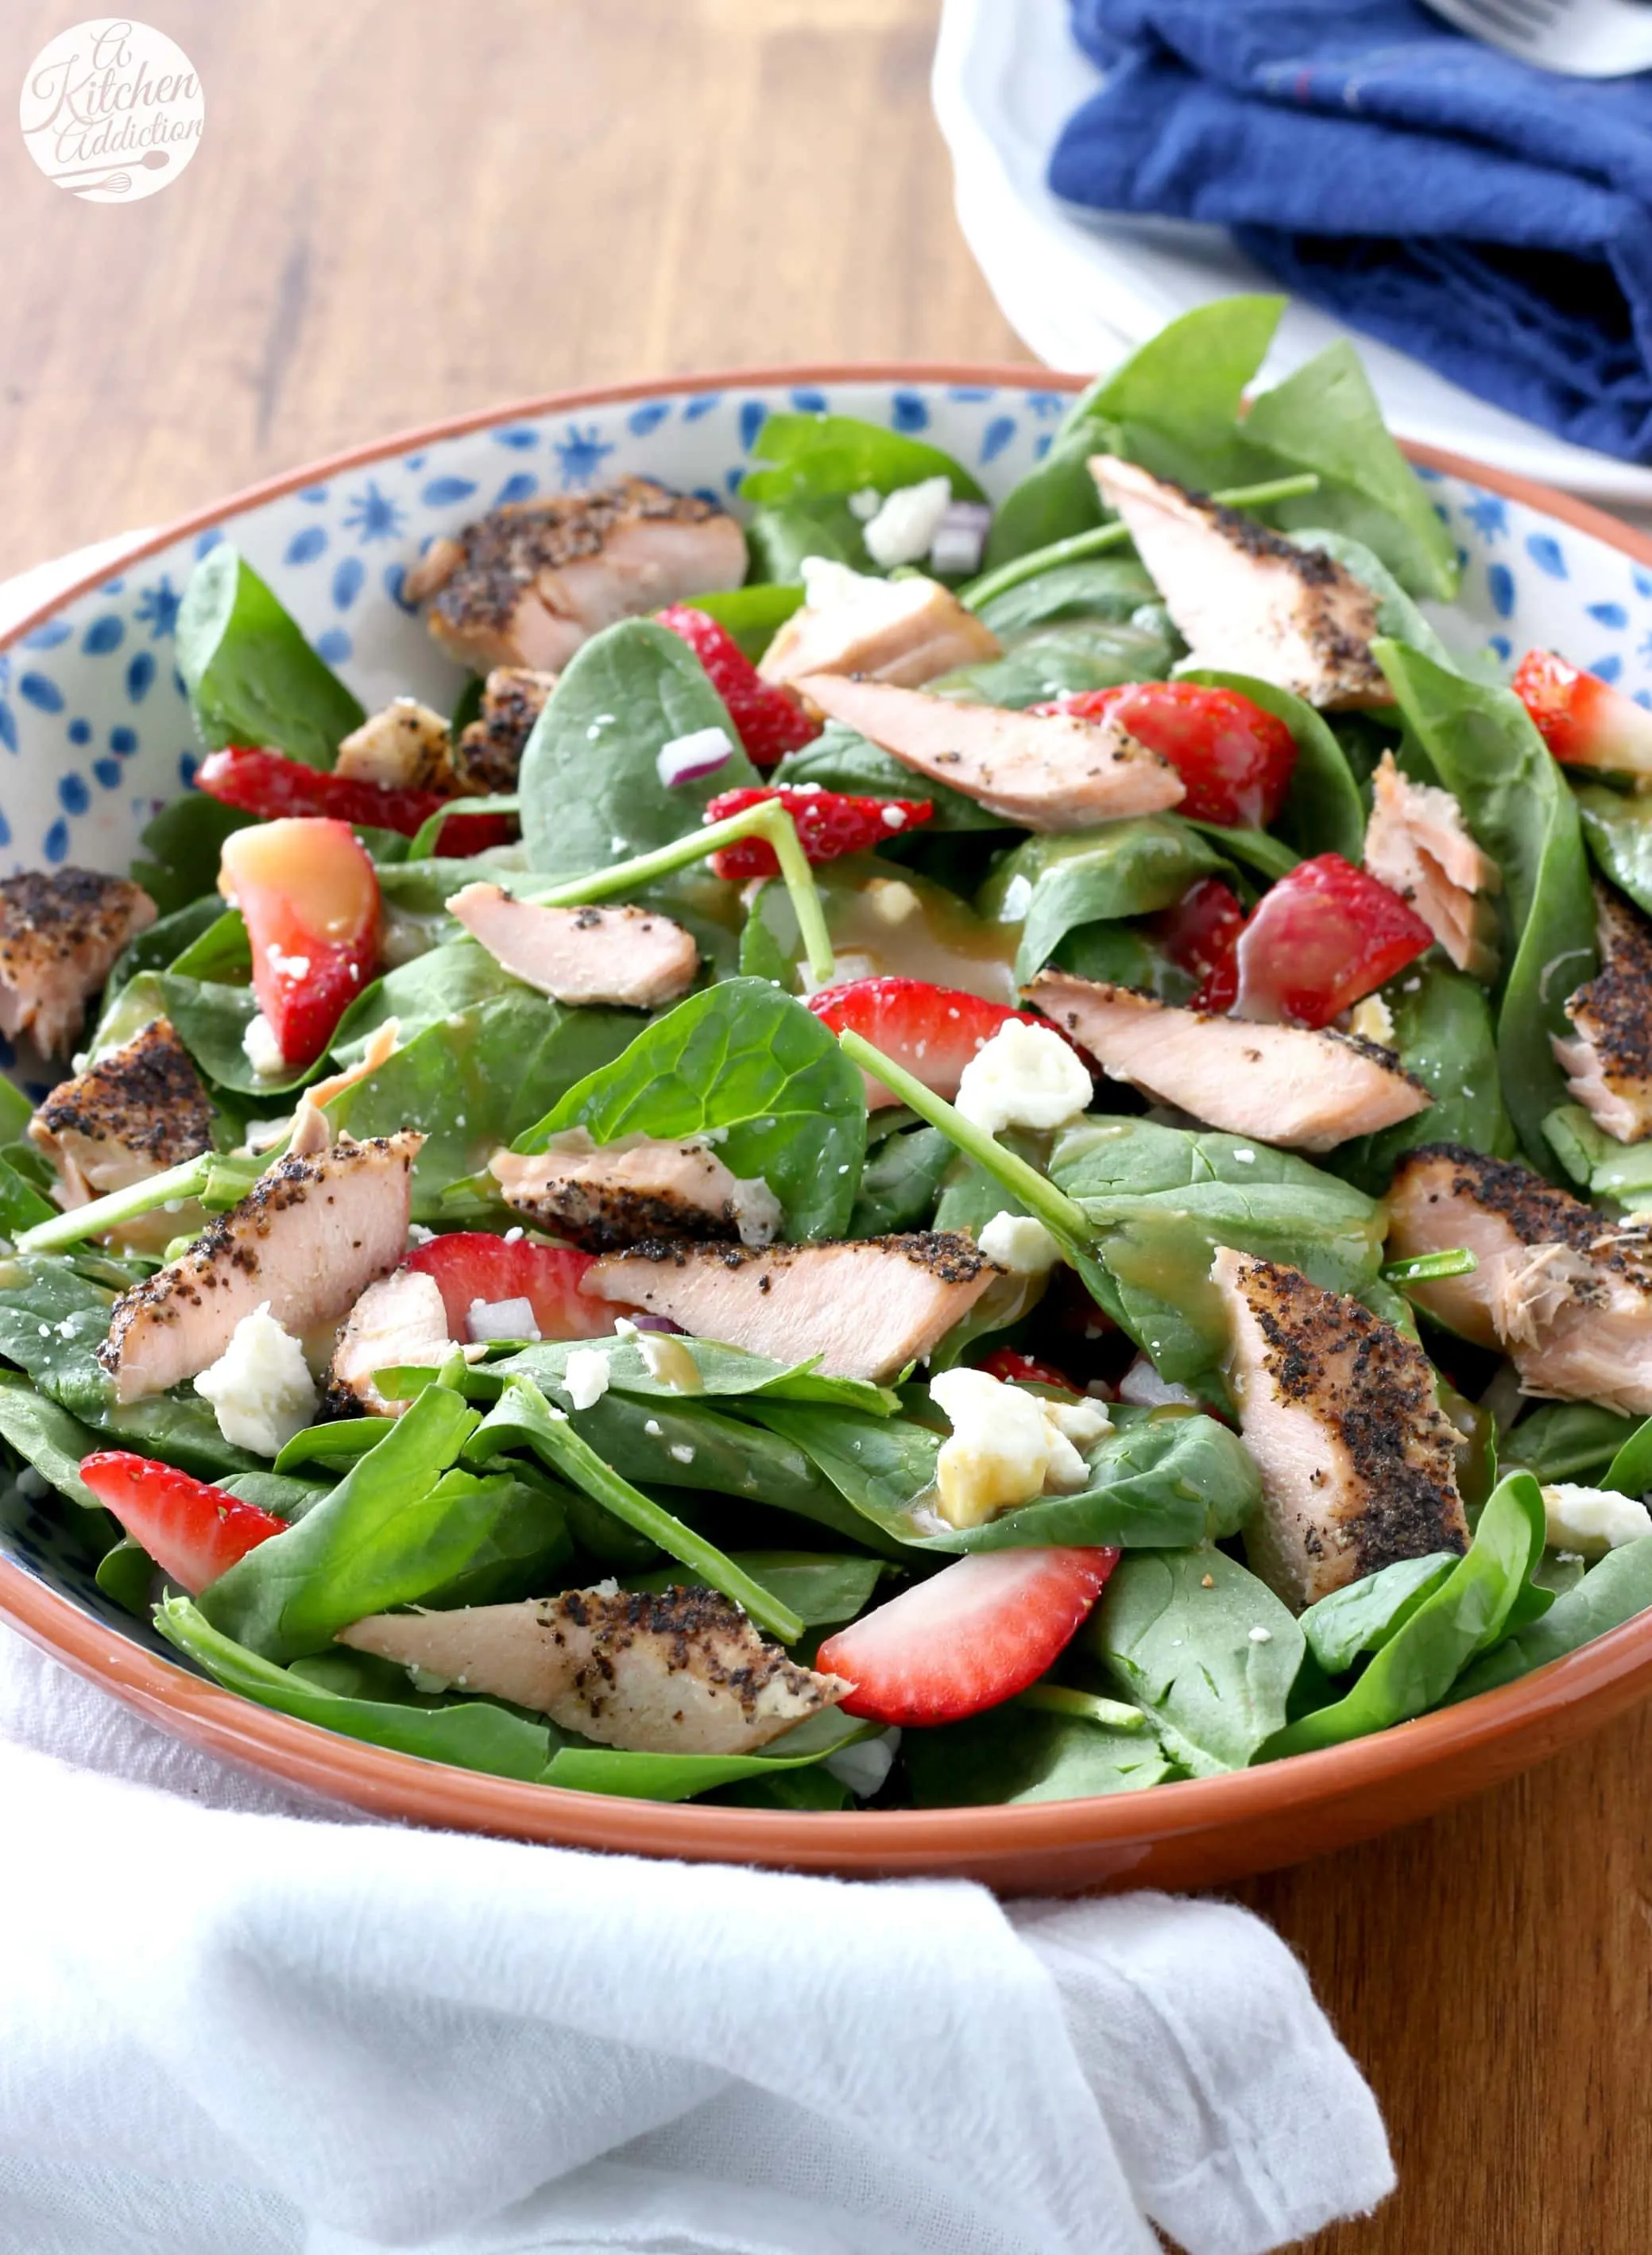 25 Minute Baked Salmon Strawberry Spinach Salad with Honey Dijon Vinaigrette Recipe from A Kitchen Addiction